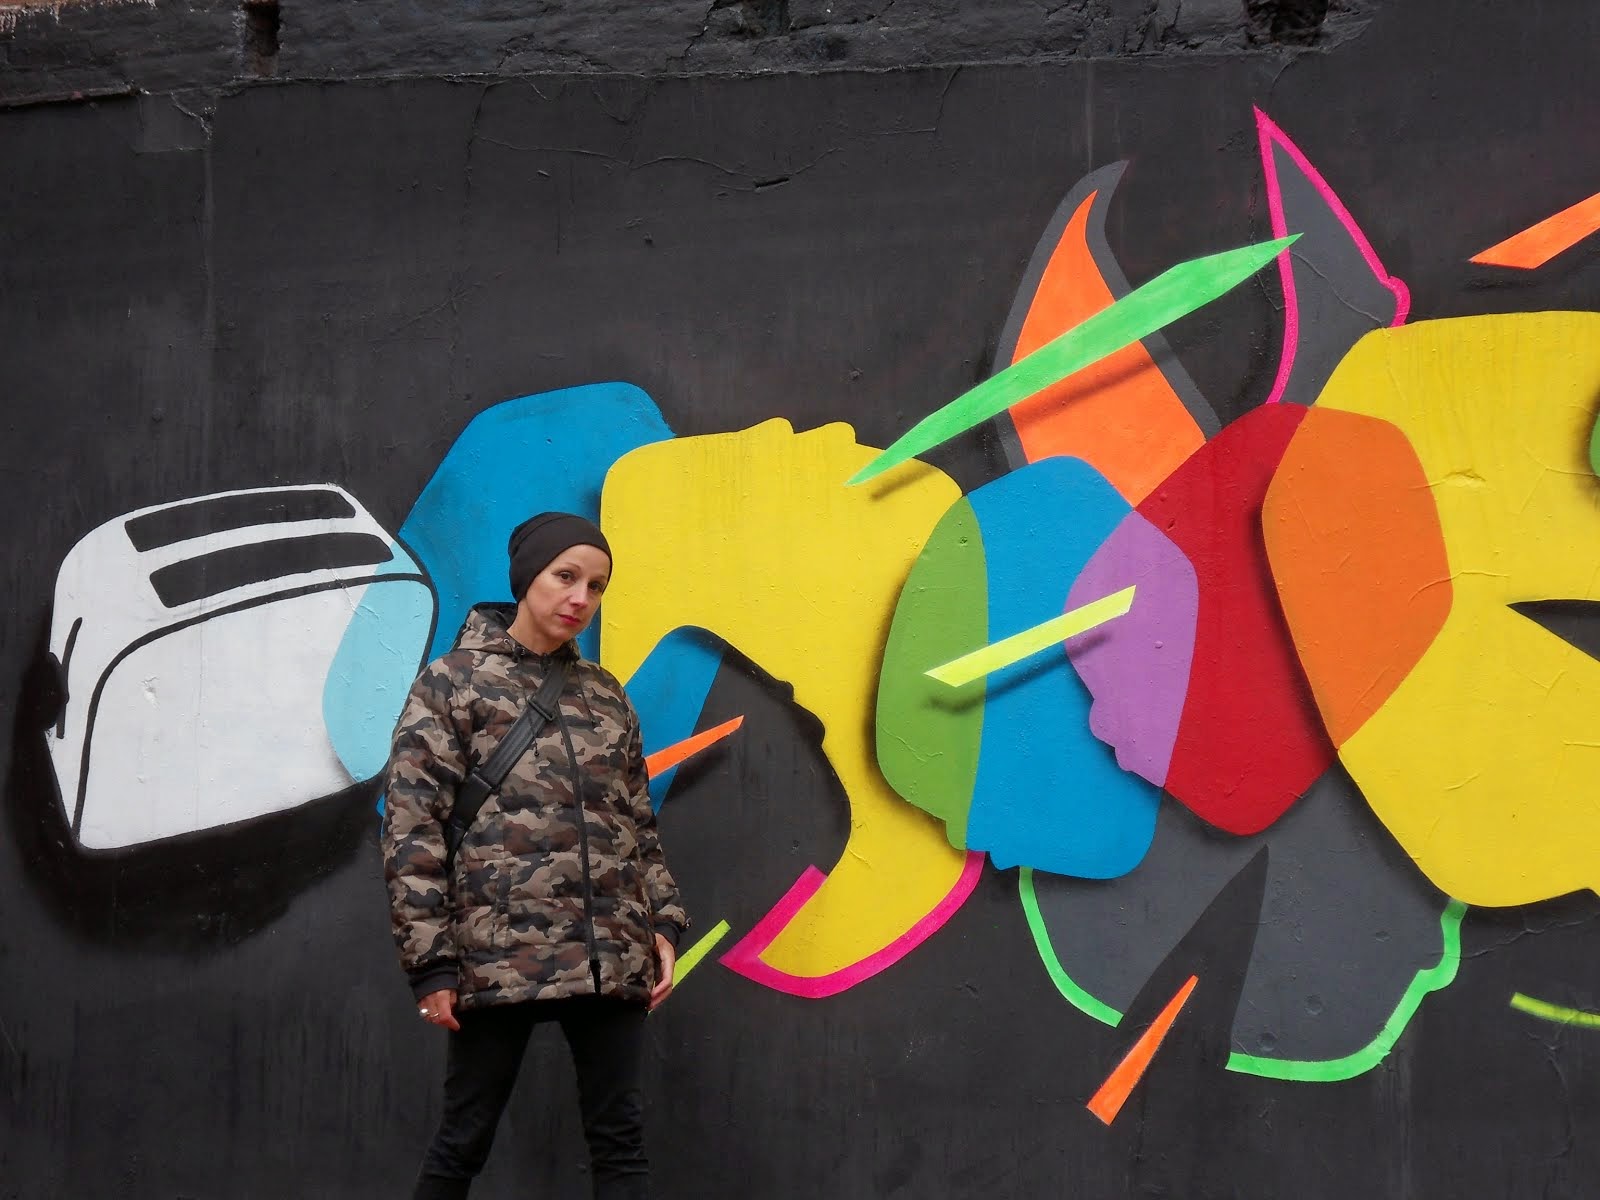 STREET ART AND FASHION + COOL SITE